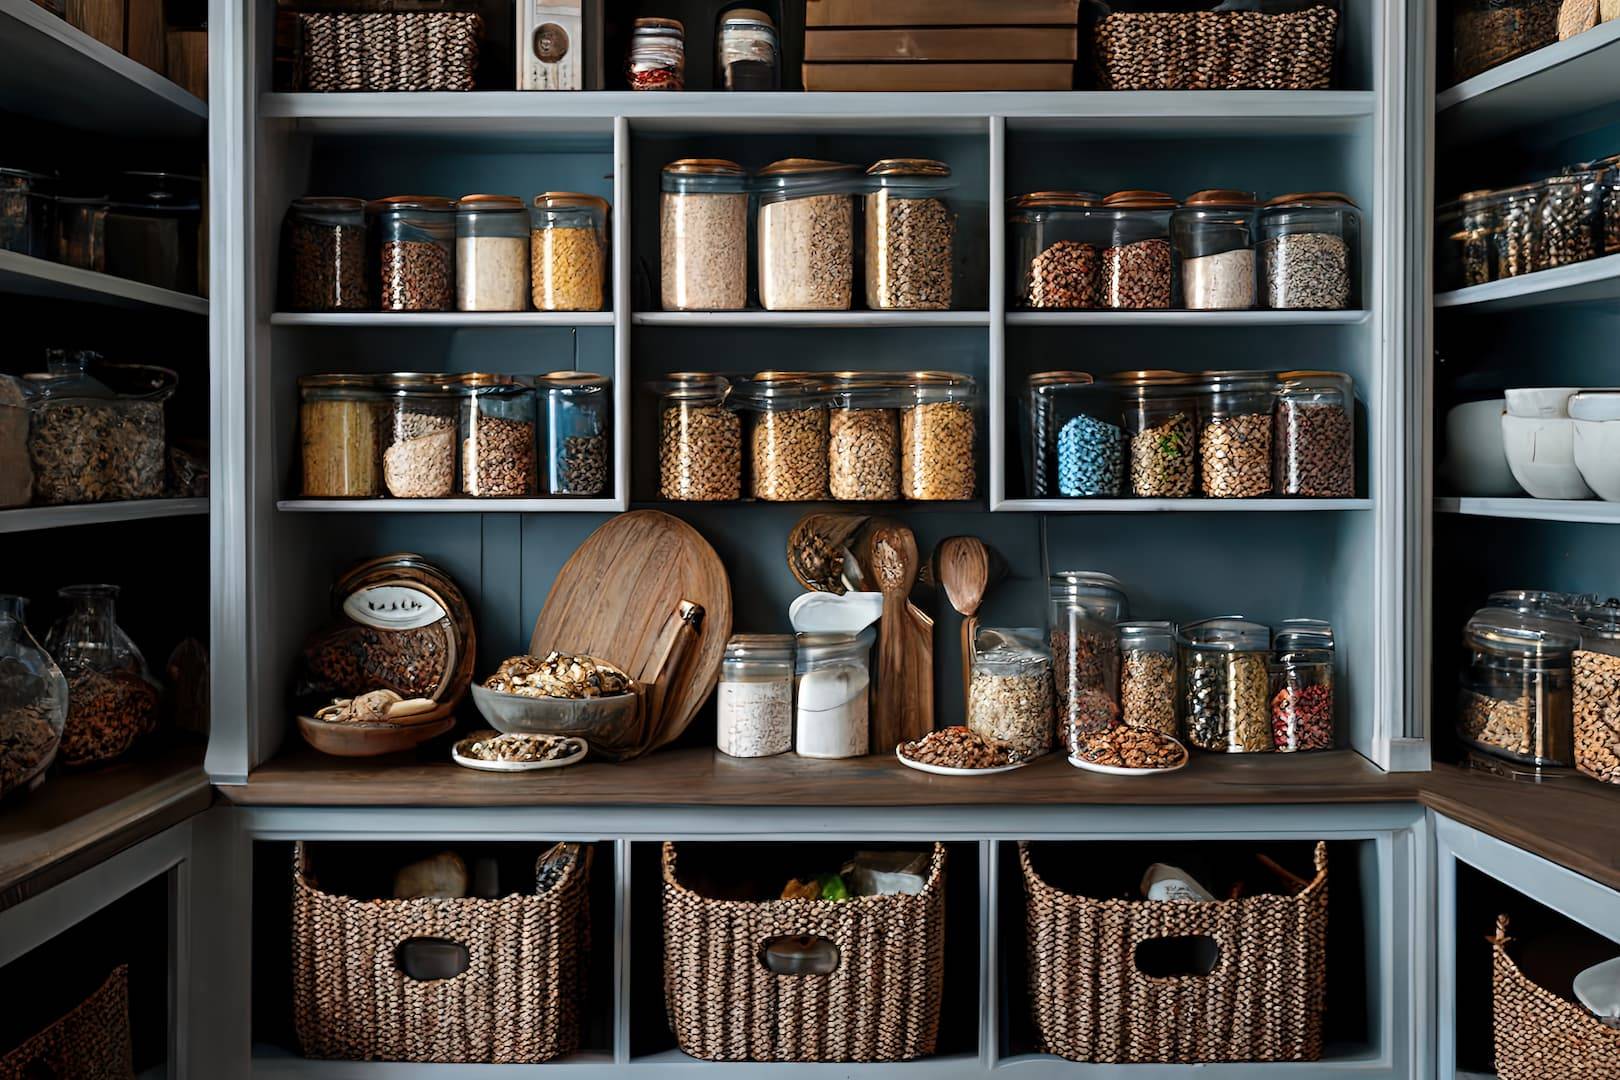 How to organise your walk-in pantry